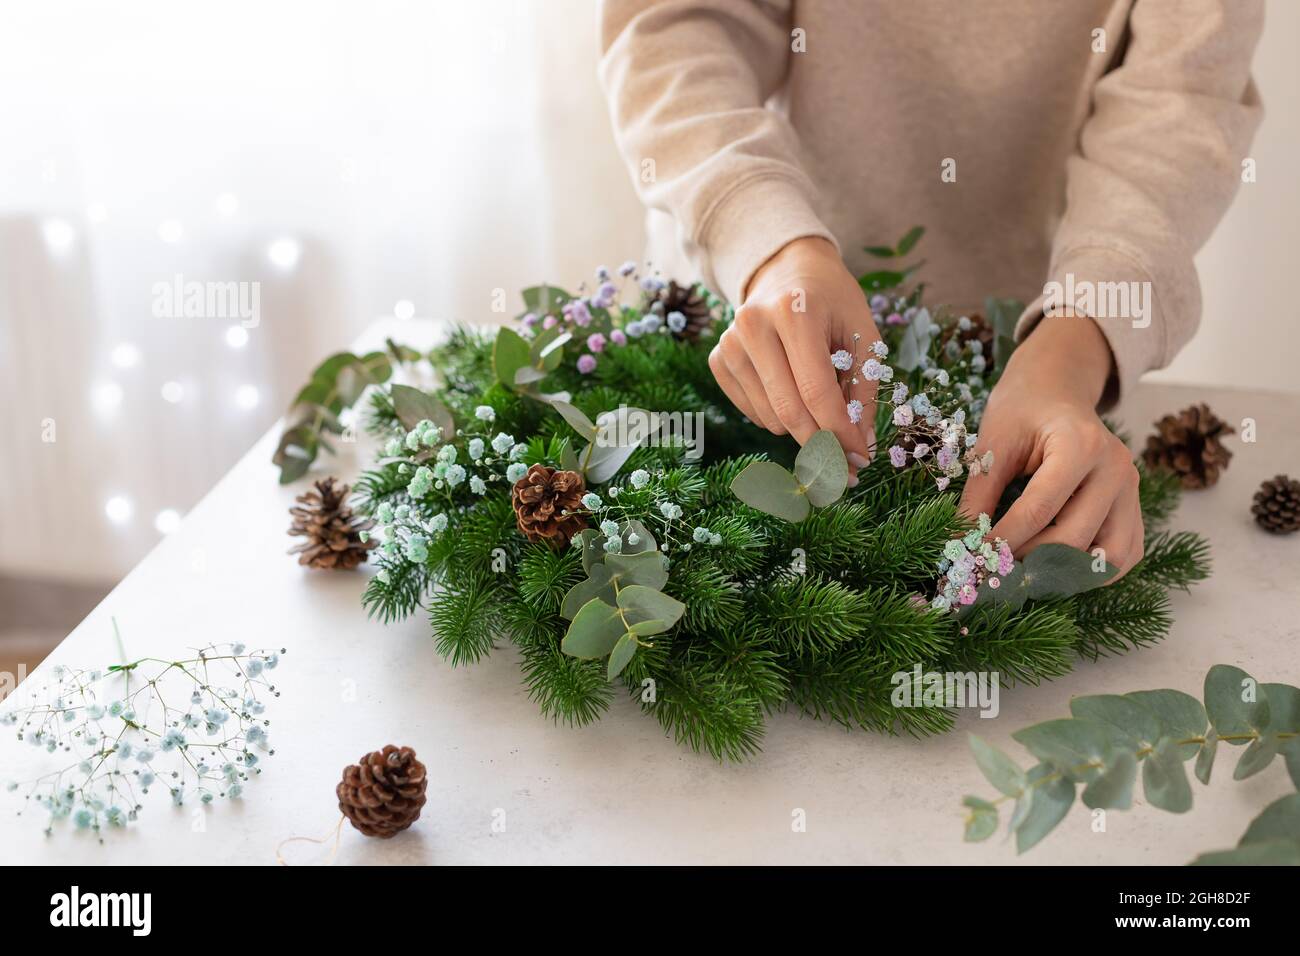 female hands making Christmas wreath with flowers Stock Photo